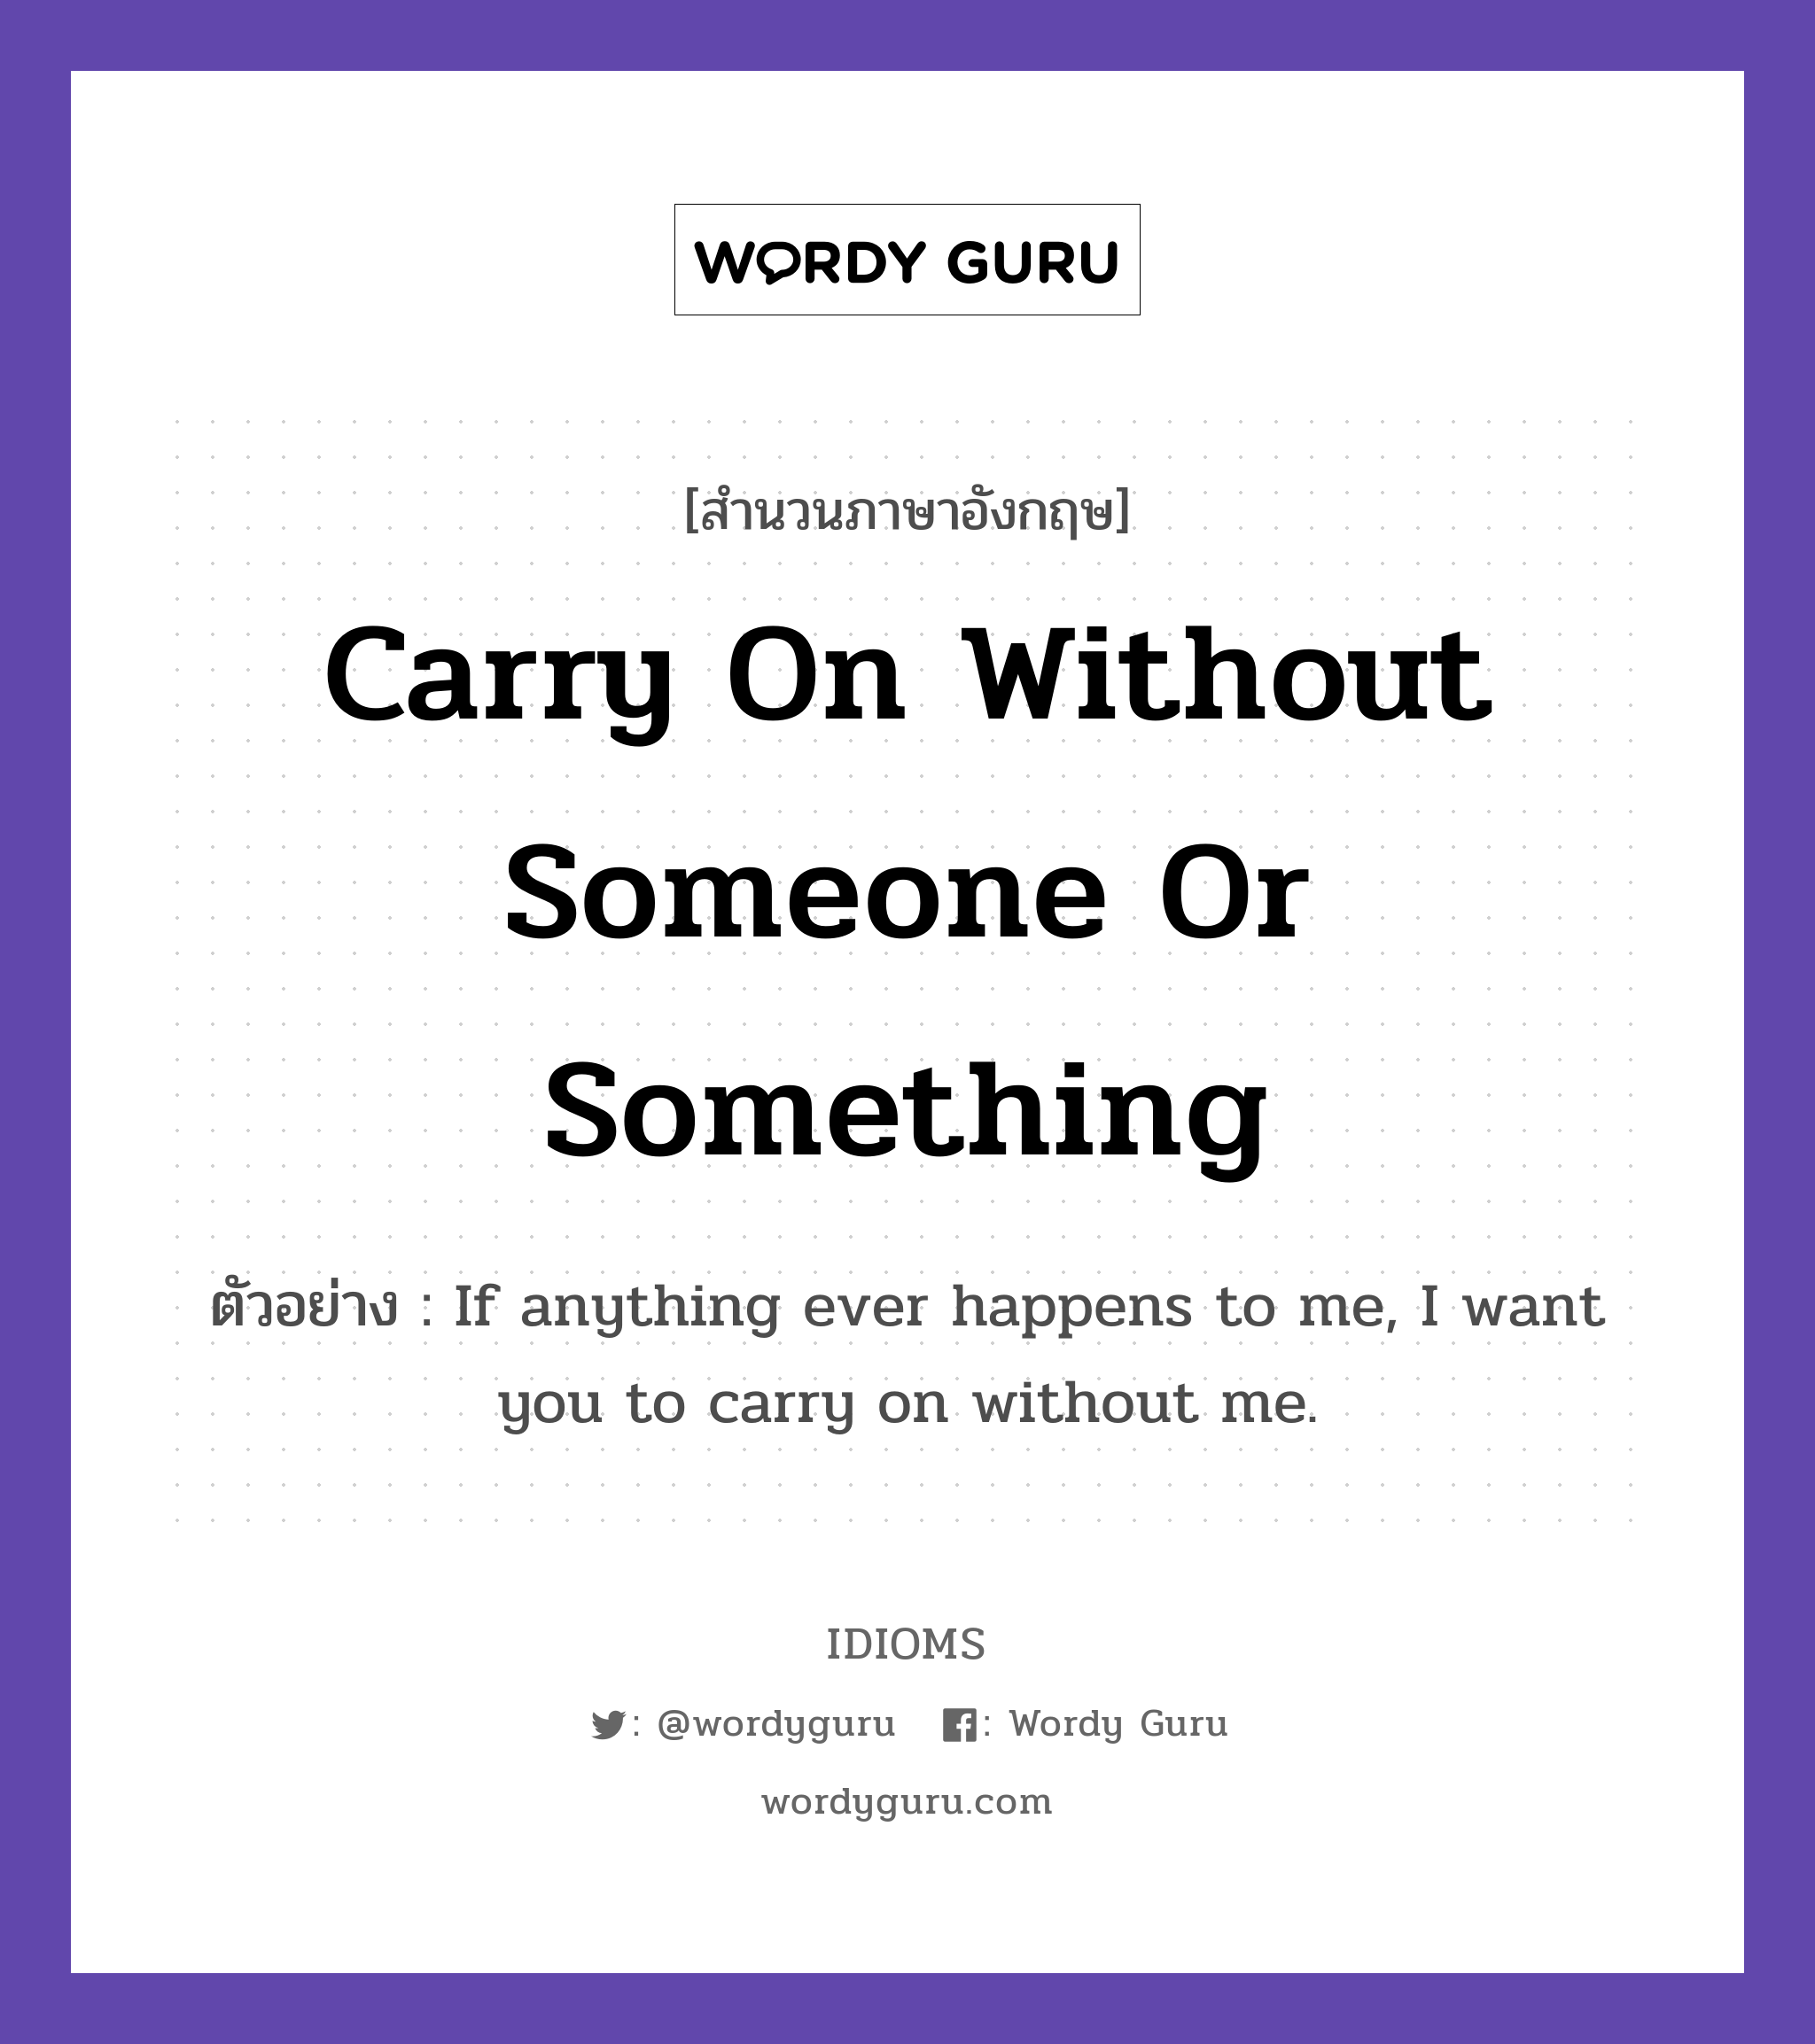 Carry On Without Someone Or Something แปลว่า?, สำนวนภาษาอังกฤษ Carry On Without Someone Or Something ตัวอย่าง If anything ever happens to me, I want you to carry on without me.